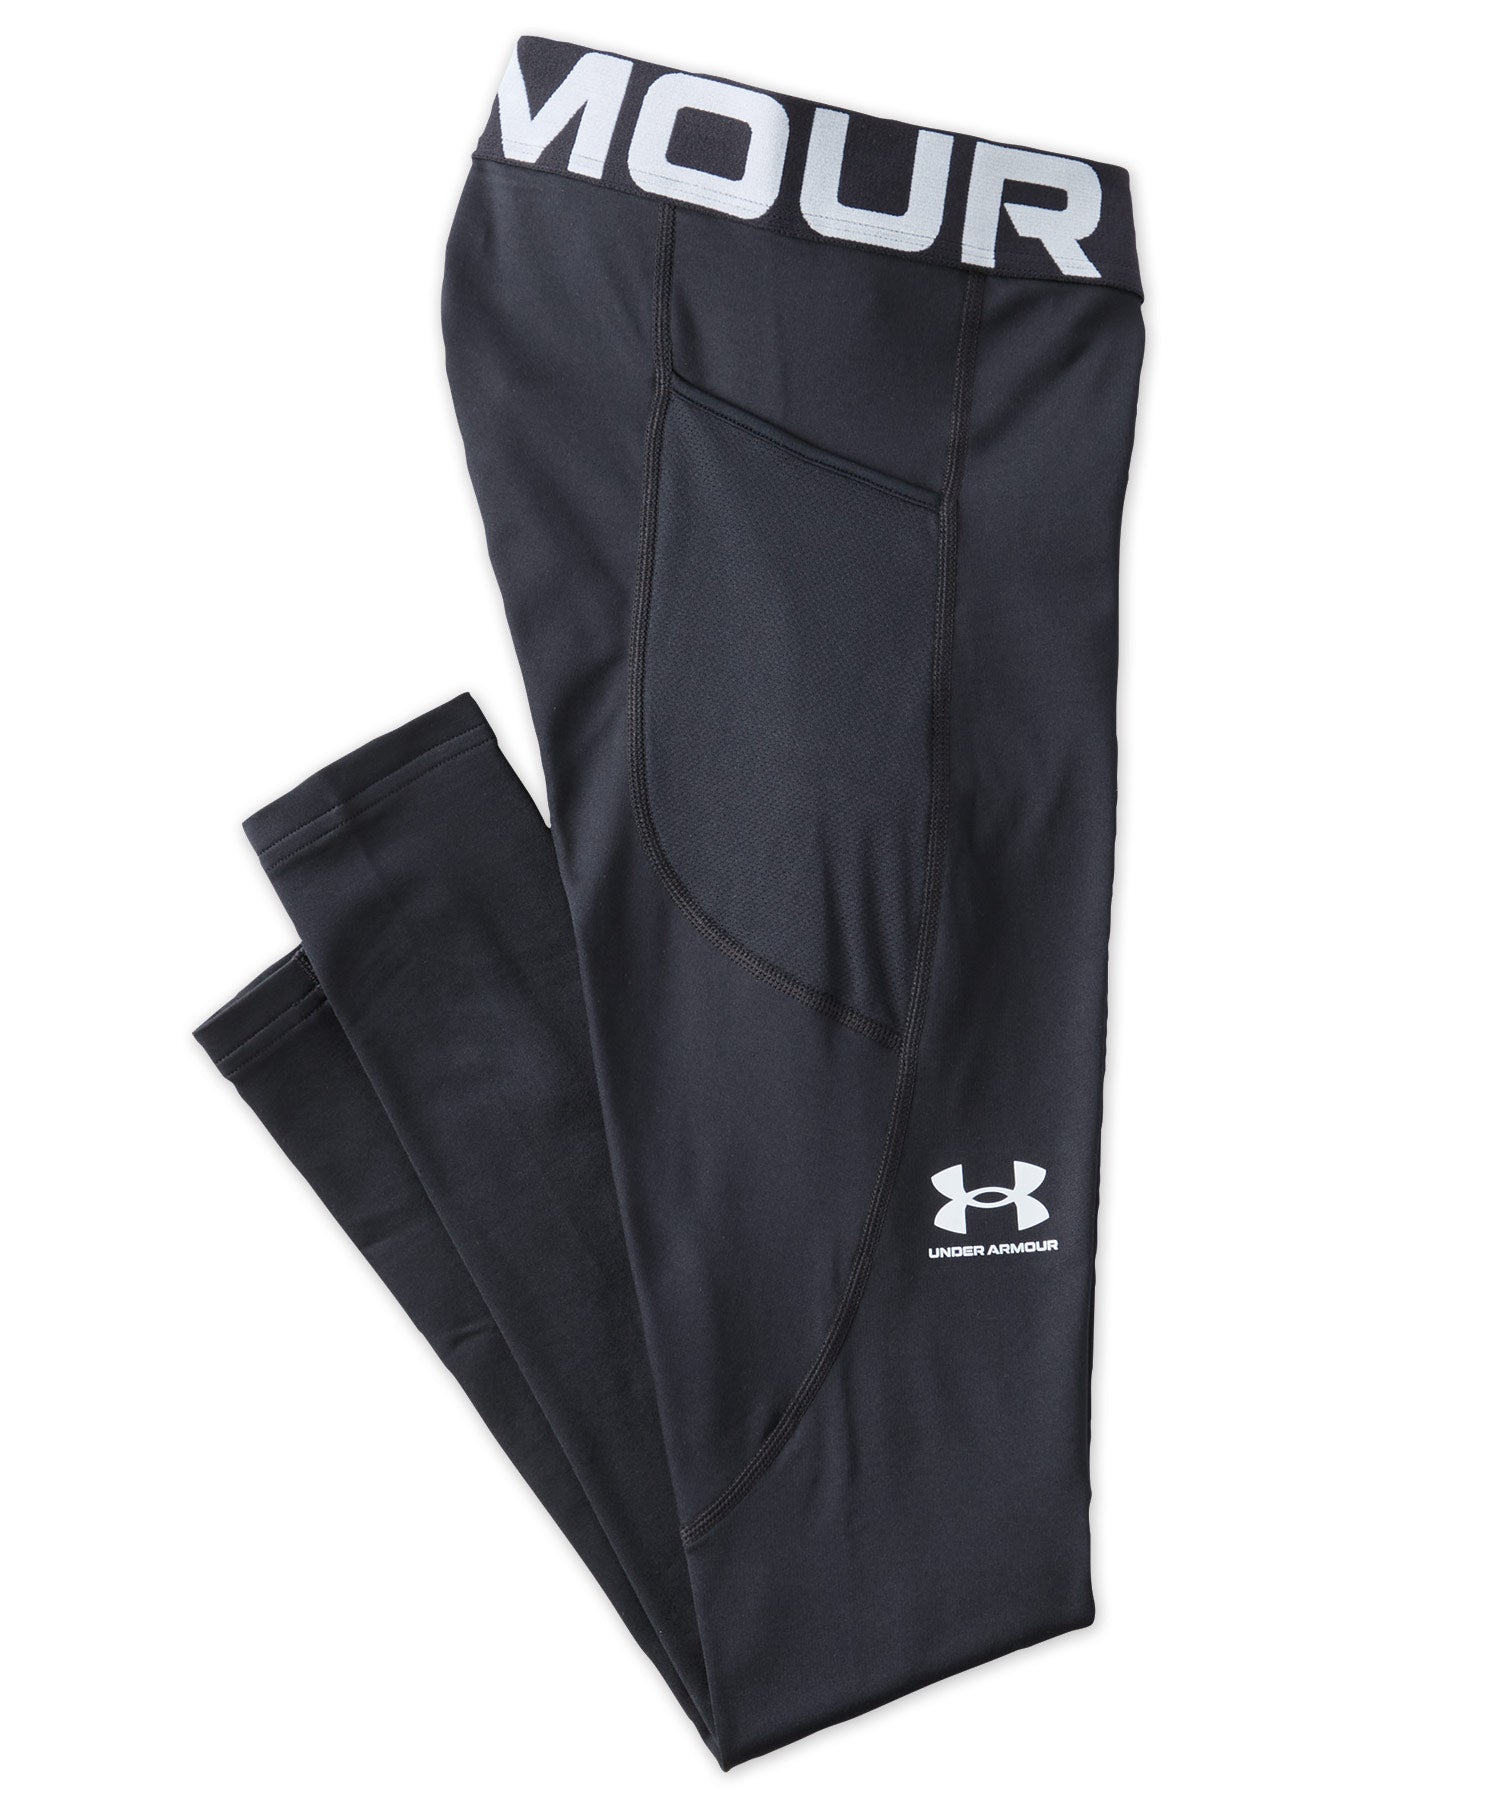 Under Armour Men Vanish Woven Pant Trousers - Pitch Gray/Black (012), Small  : Amazon.co.uk: Fashion